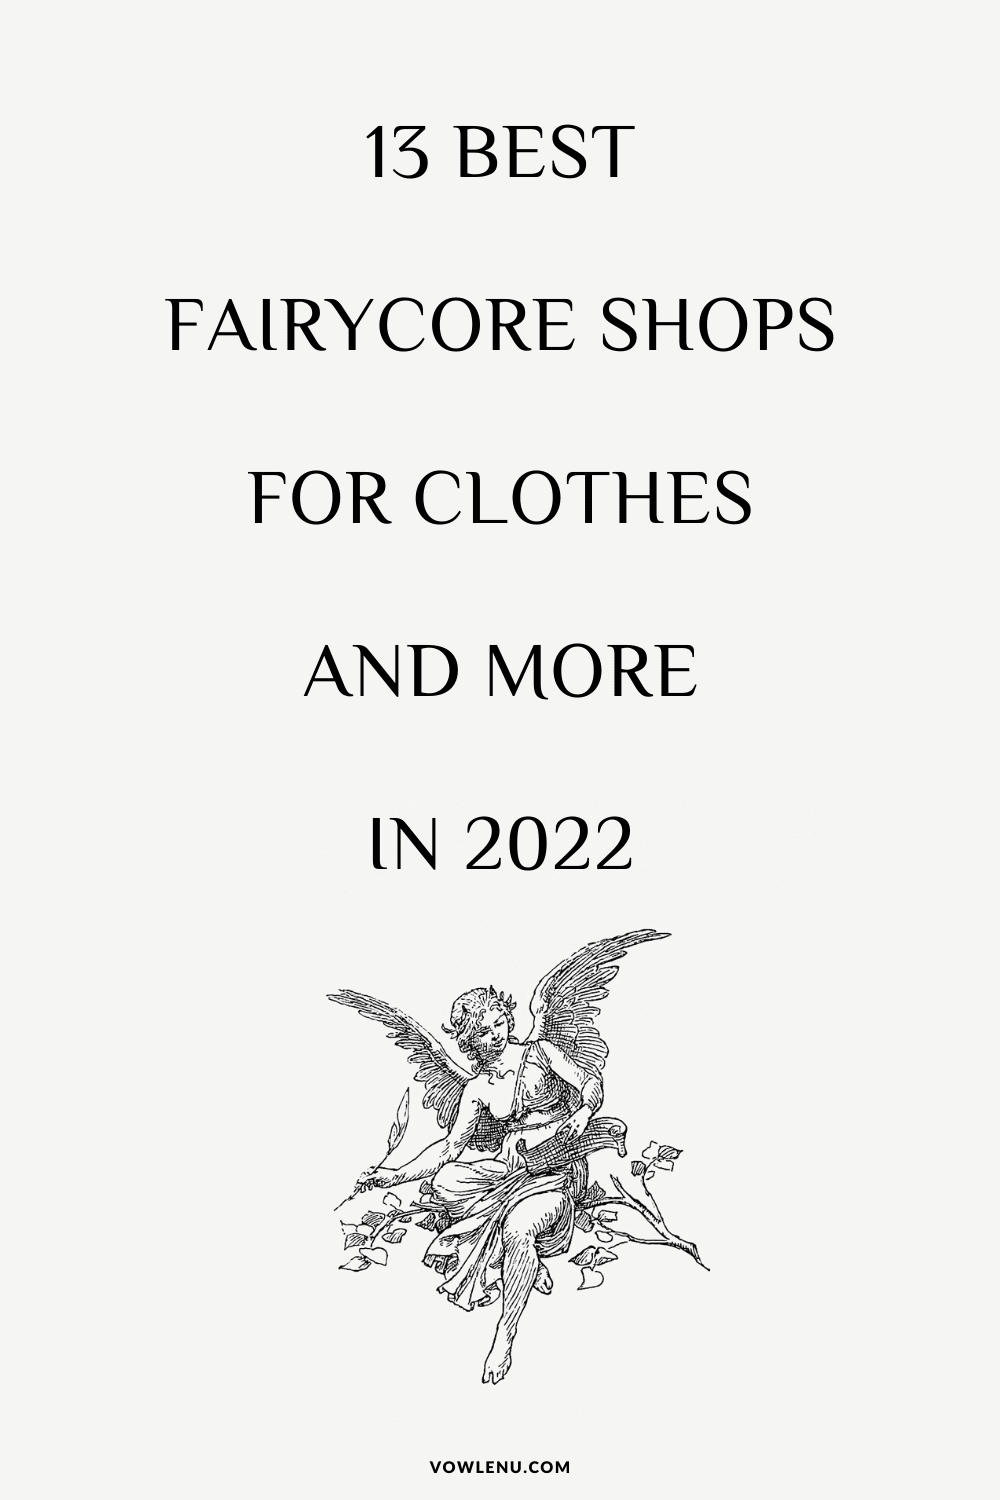 13 best fairycore shops for clothes and more in 2022